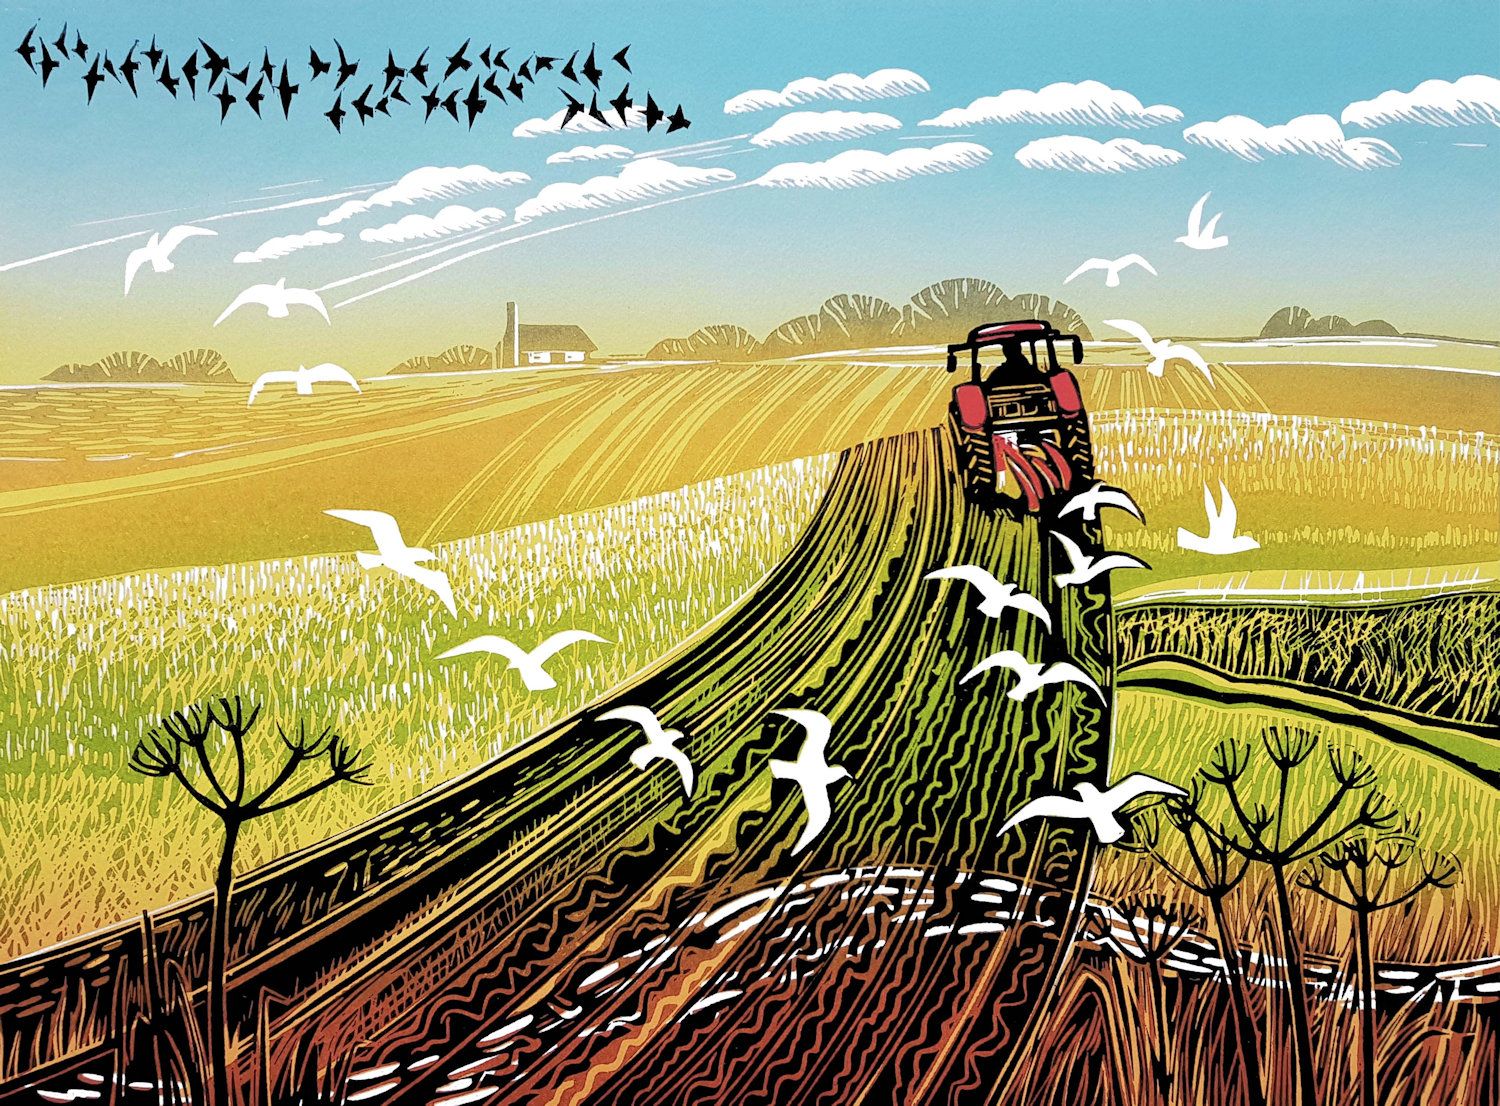 Ploughing the Furrows by Rob Barnes